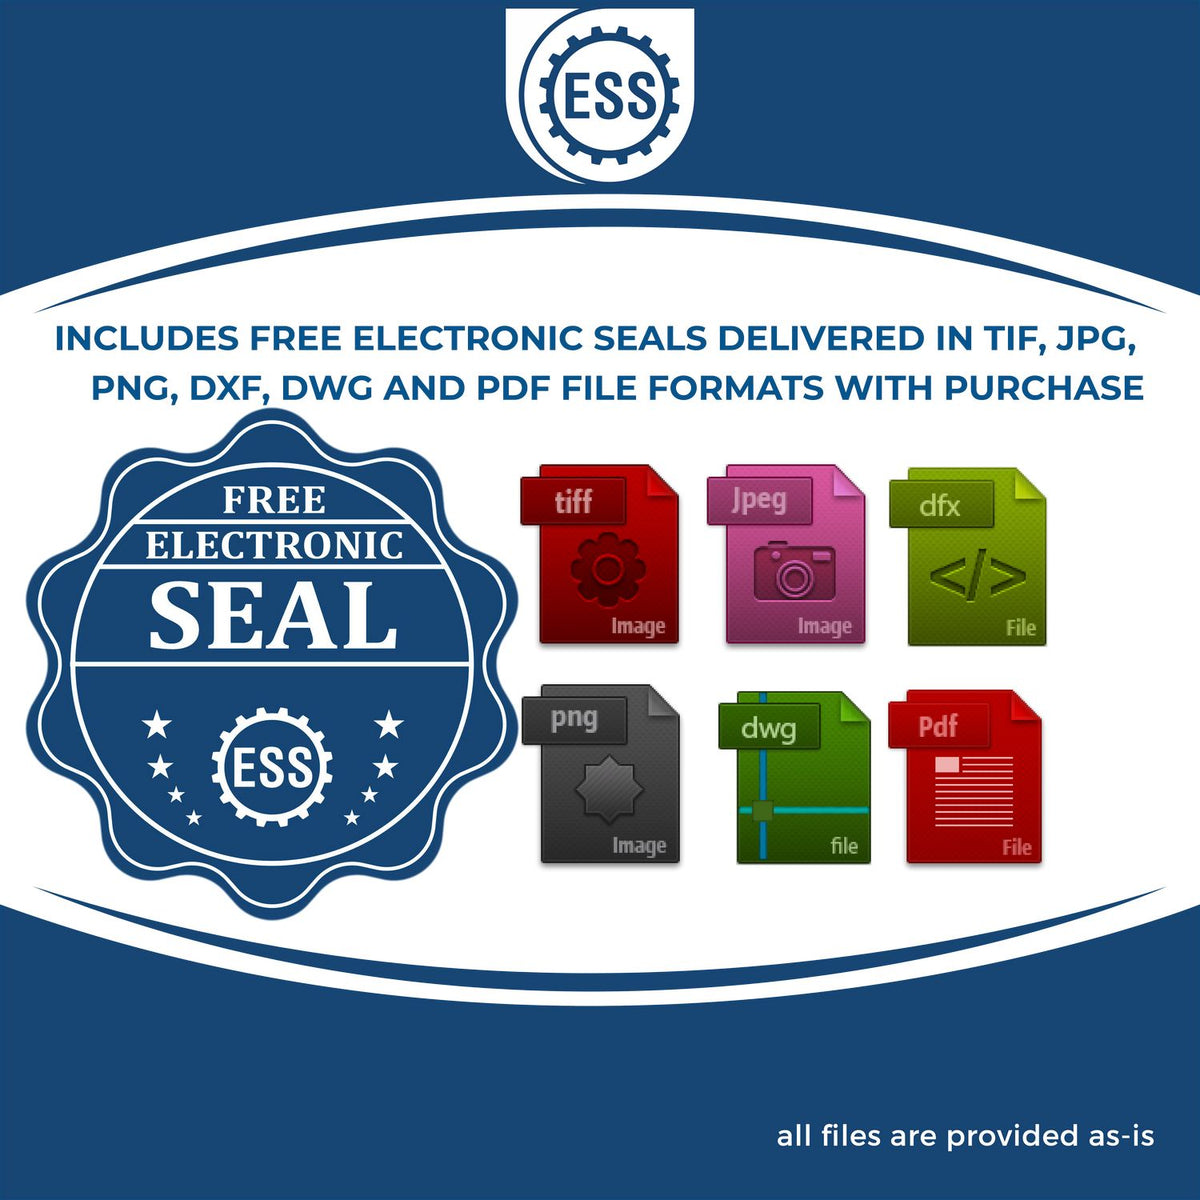 An infographic for the free electronic seal for the MaxLight Premium Pre-Inked Rhode Island Rectangular Notarial Stamp illustrating the different file type icons such as DXF, DWG, TIF, JPG and PNG.